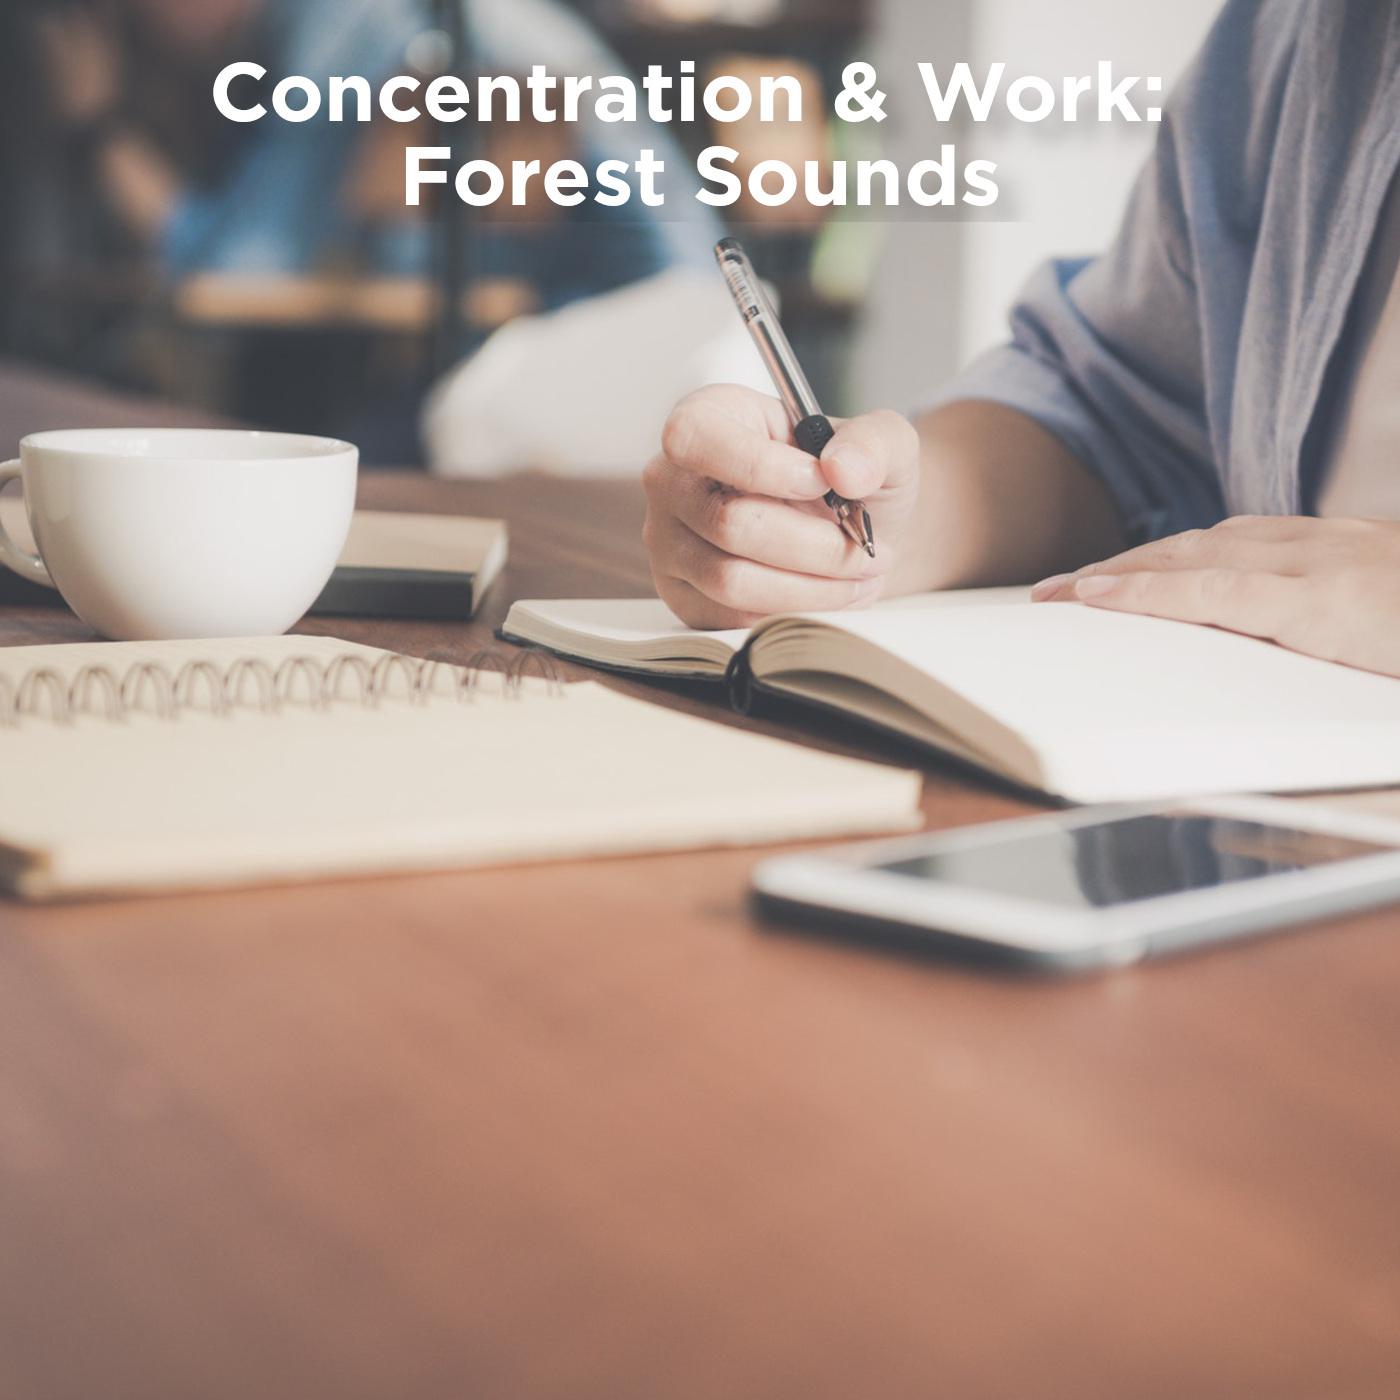 Concentration & Work: Forest Sounds